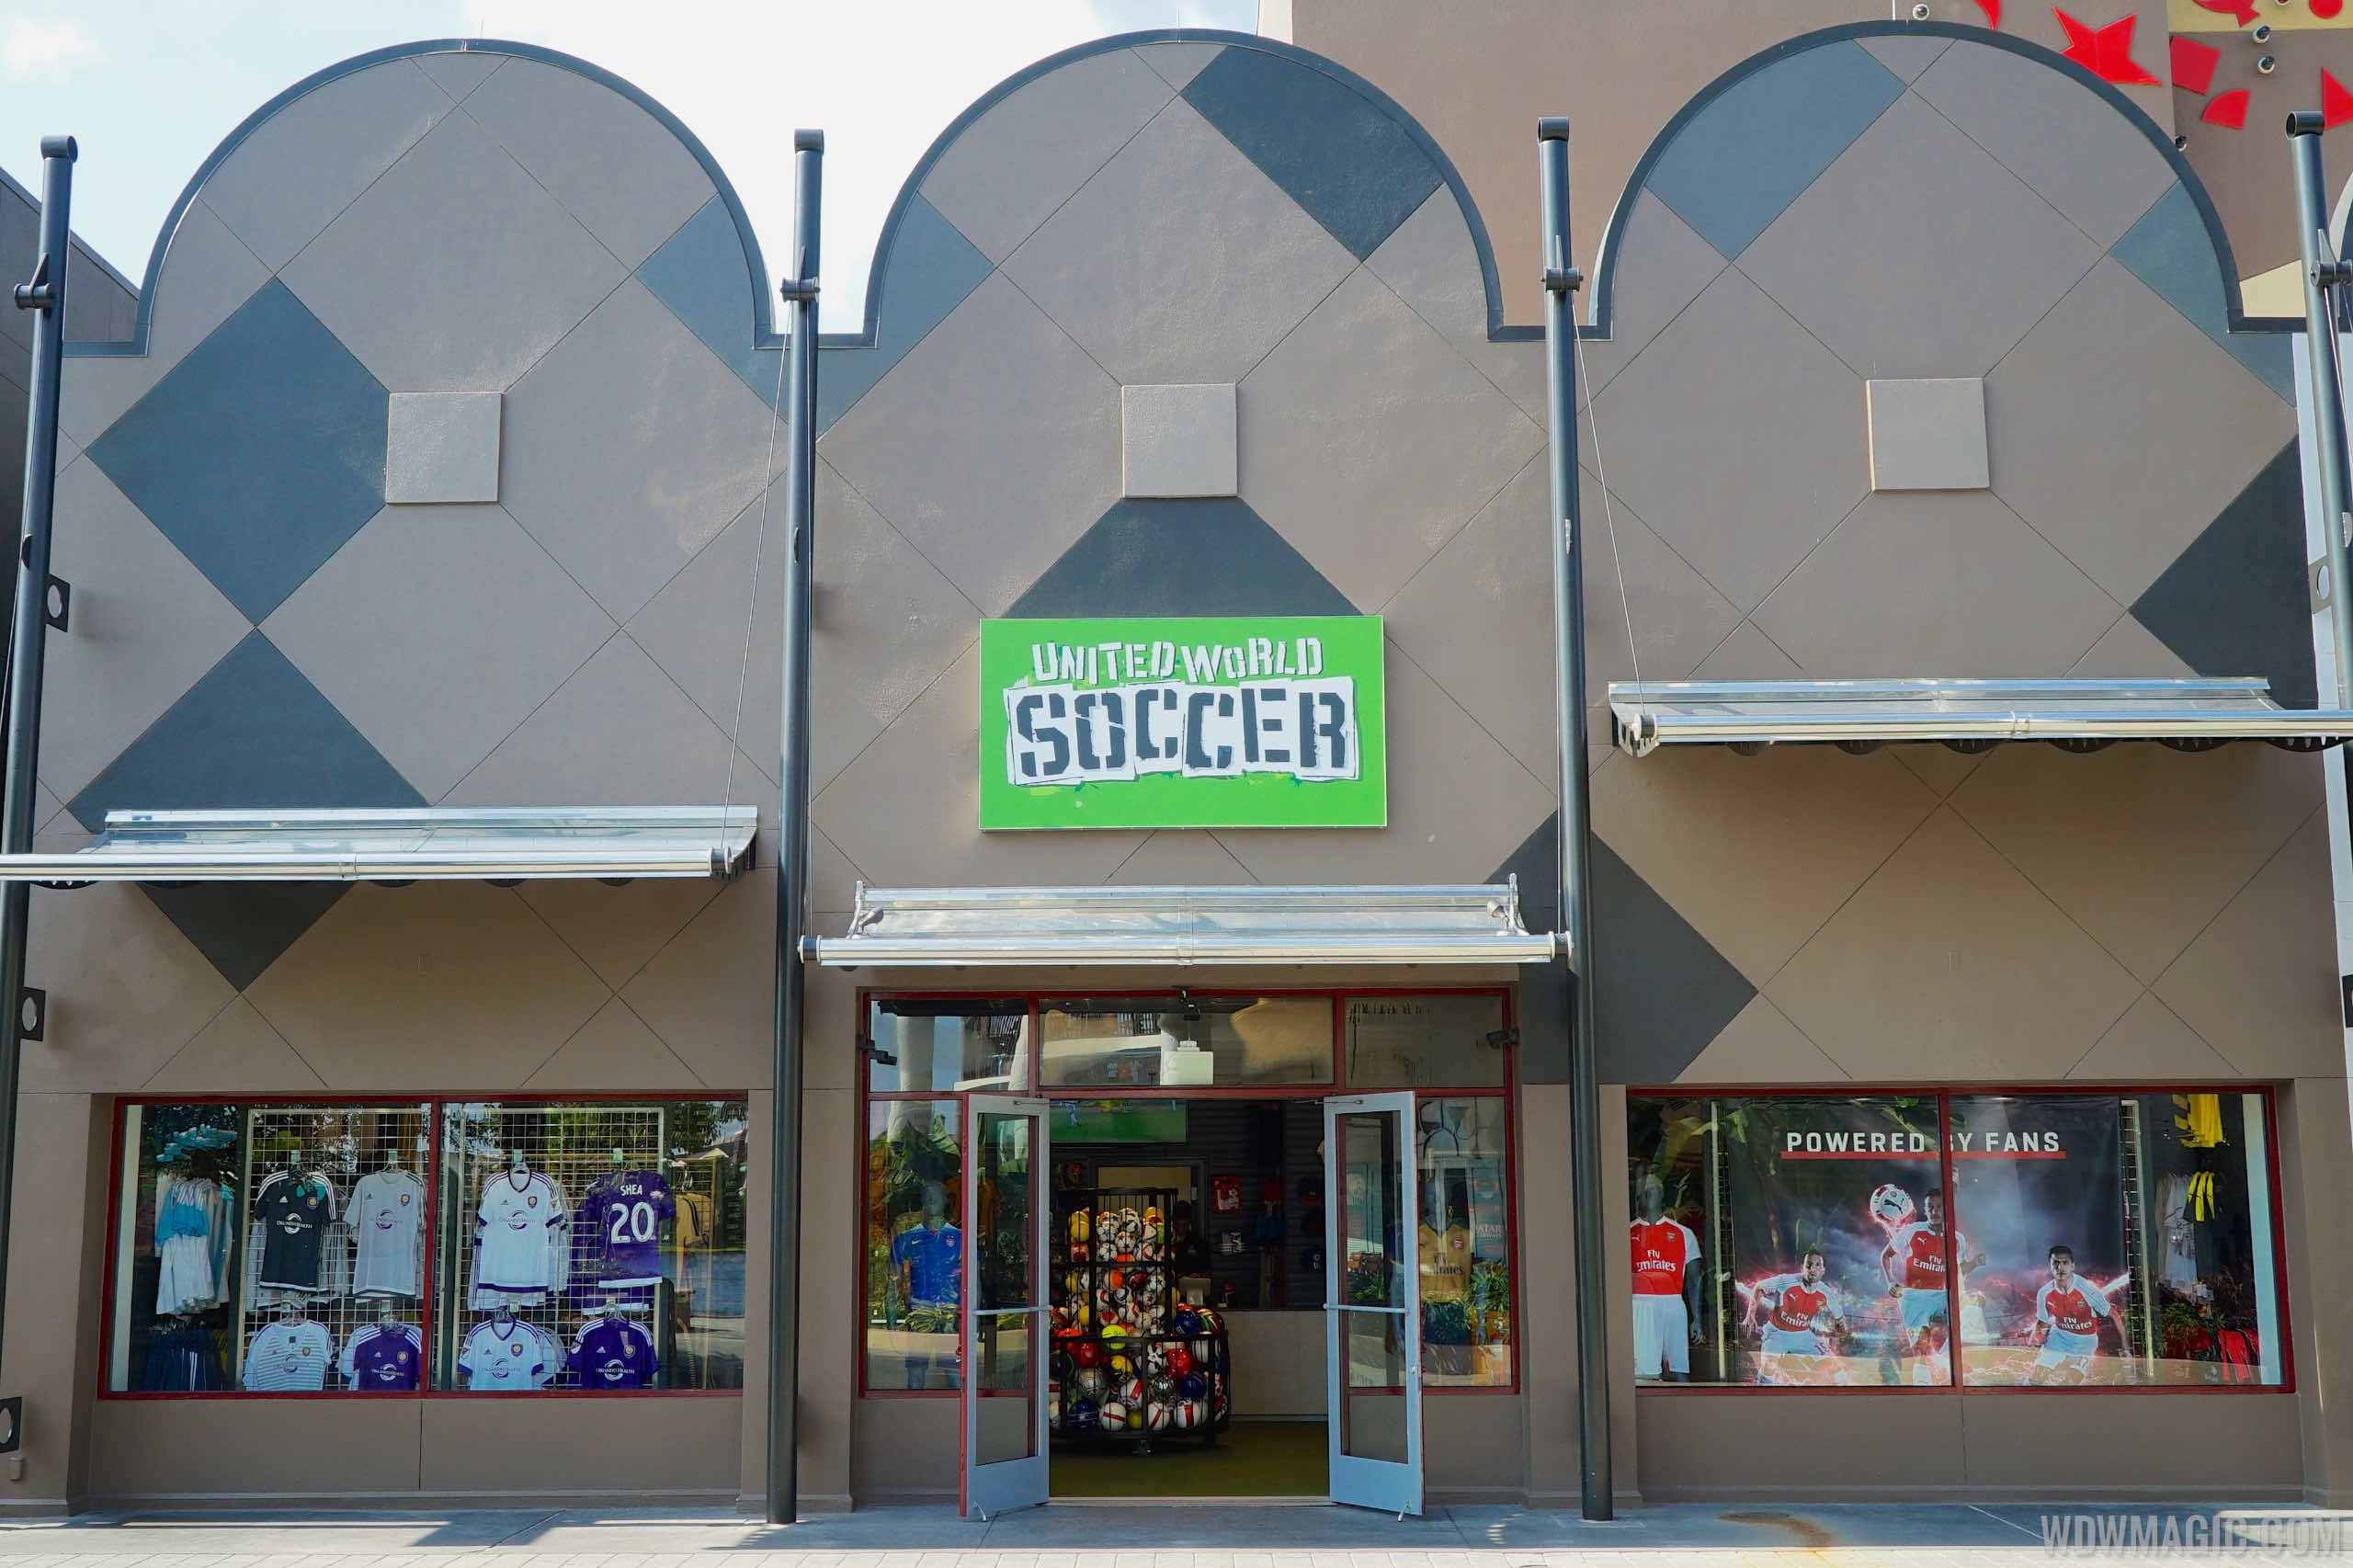 United World Soccer - Store front